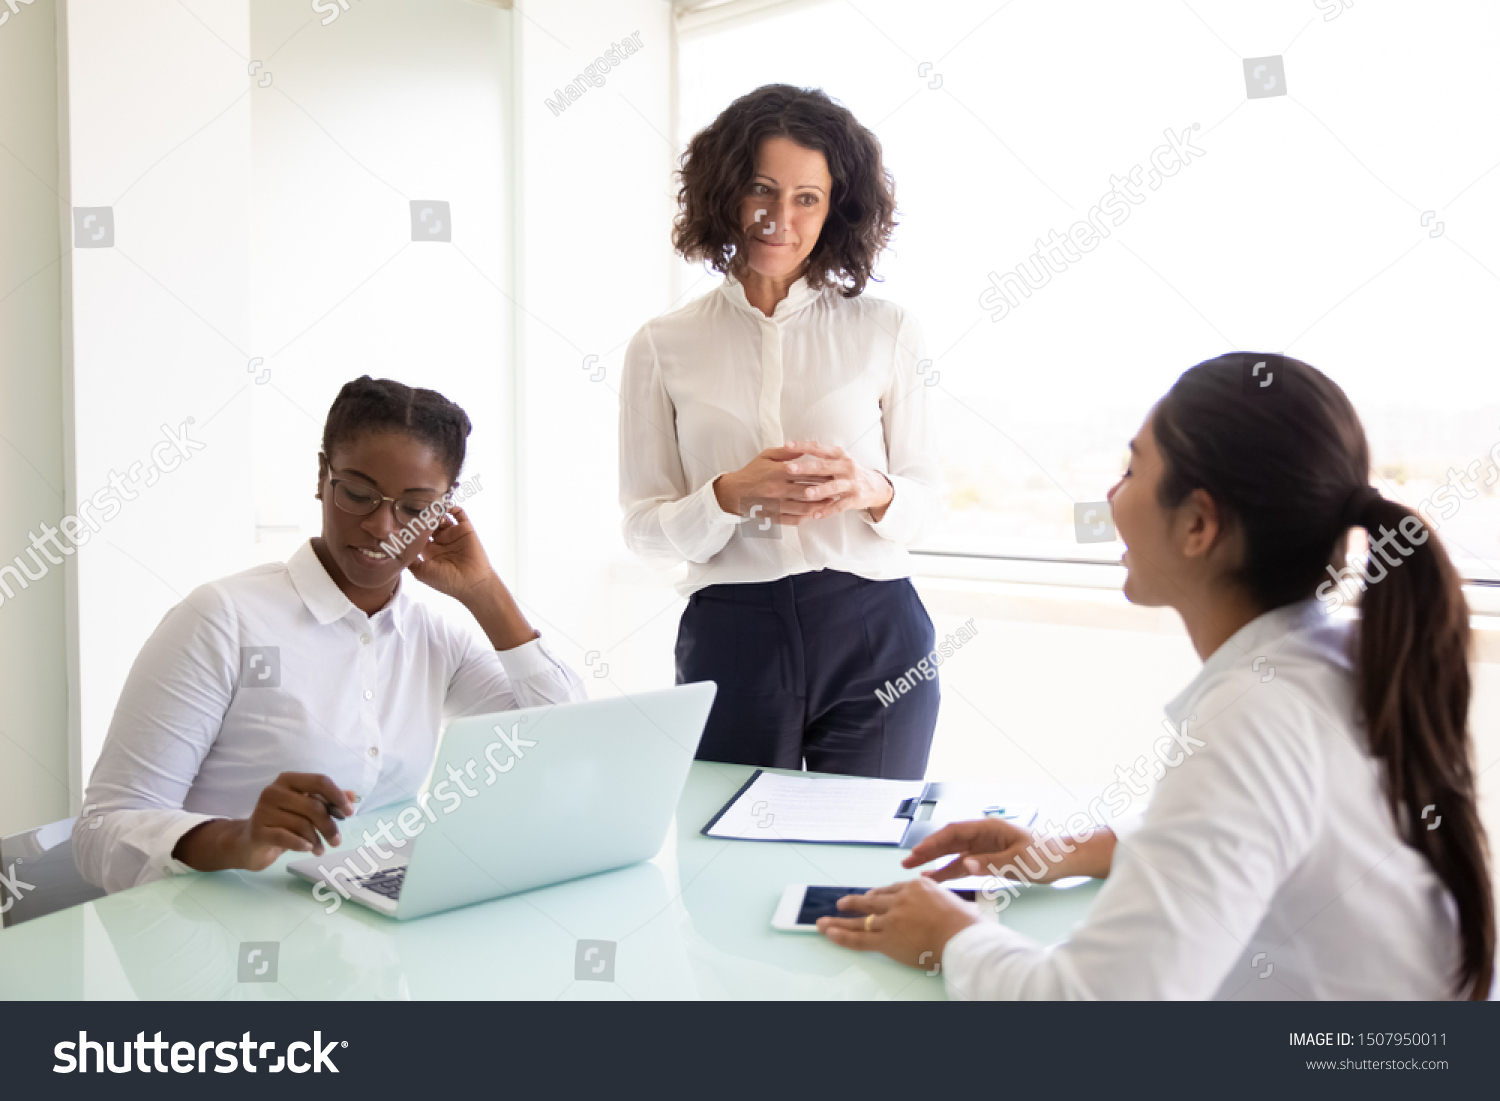 Confident business leader discussing project with team. Businesswomen sitting and standing at conference table, using laptop and talking. Teamwork or leadership concept #1507950011